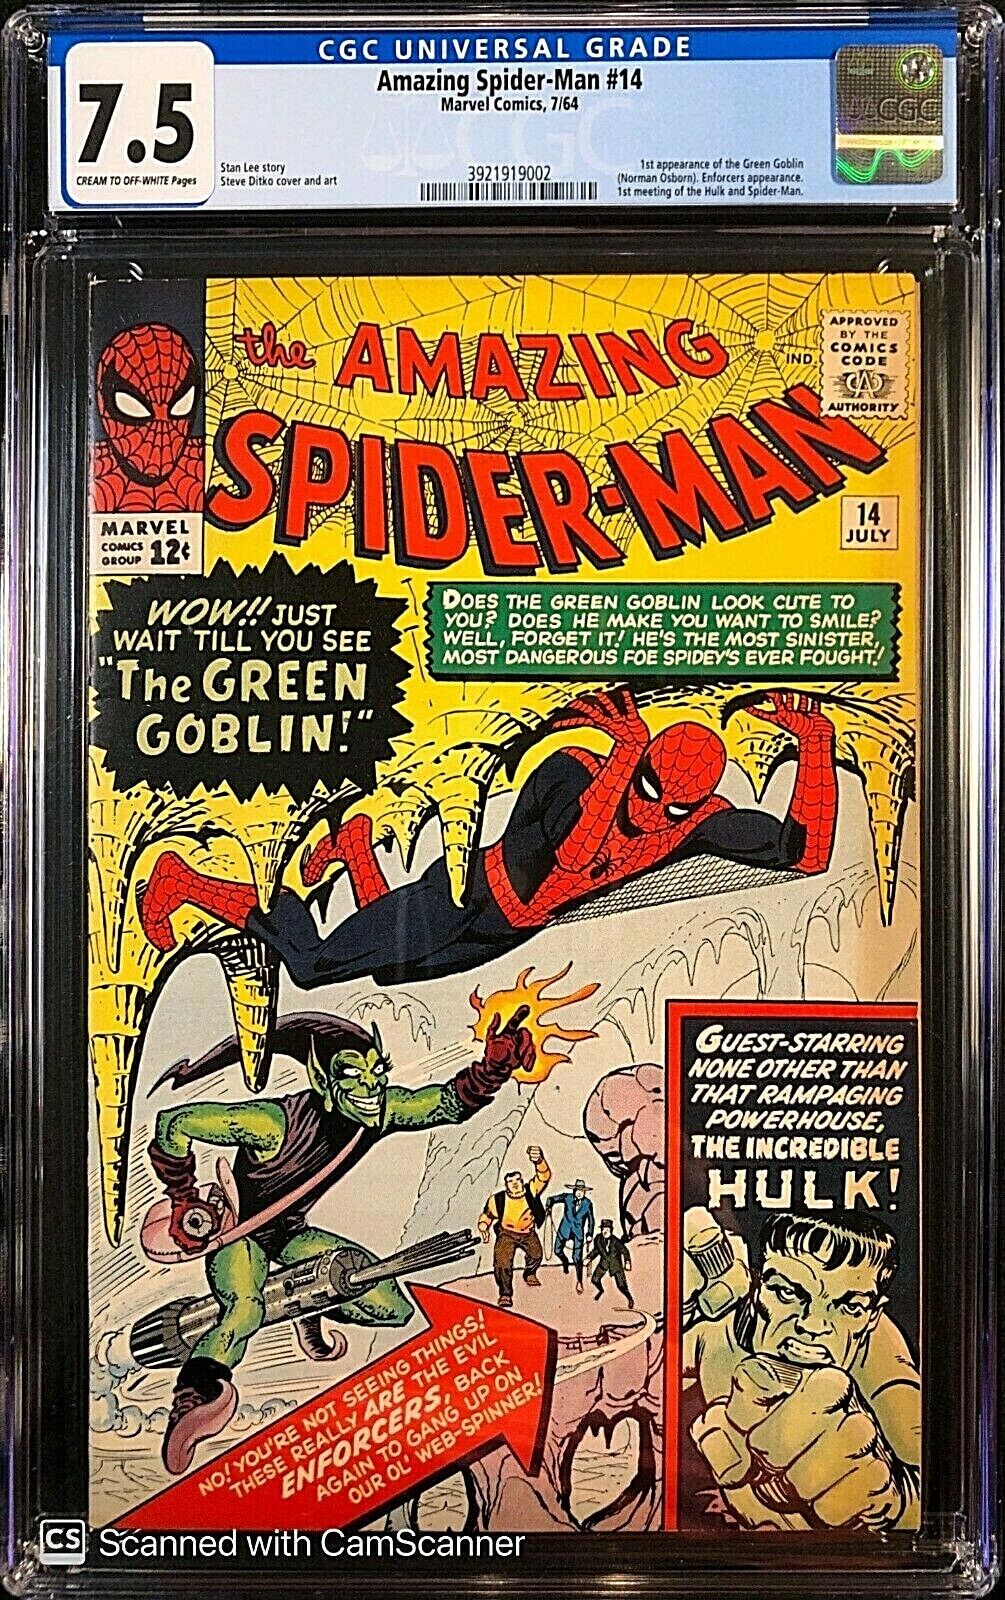 Amazing Spider-Man #14 CGC 7.5 VF- Gorgeous Rich, Vivid Colors Great Eye Appeal